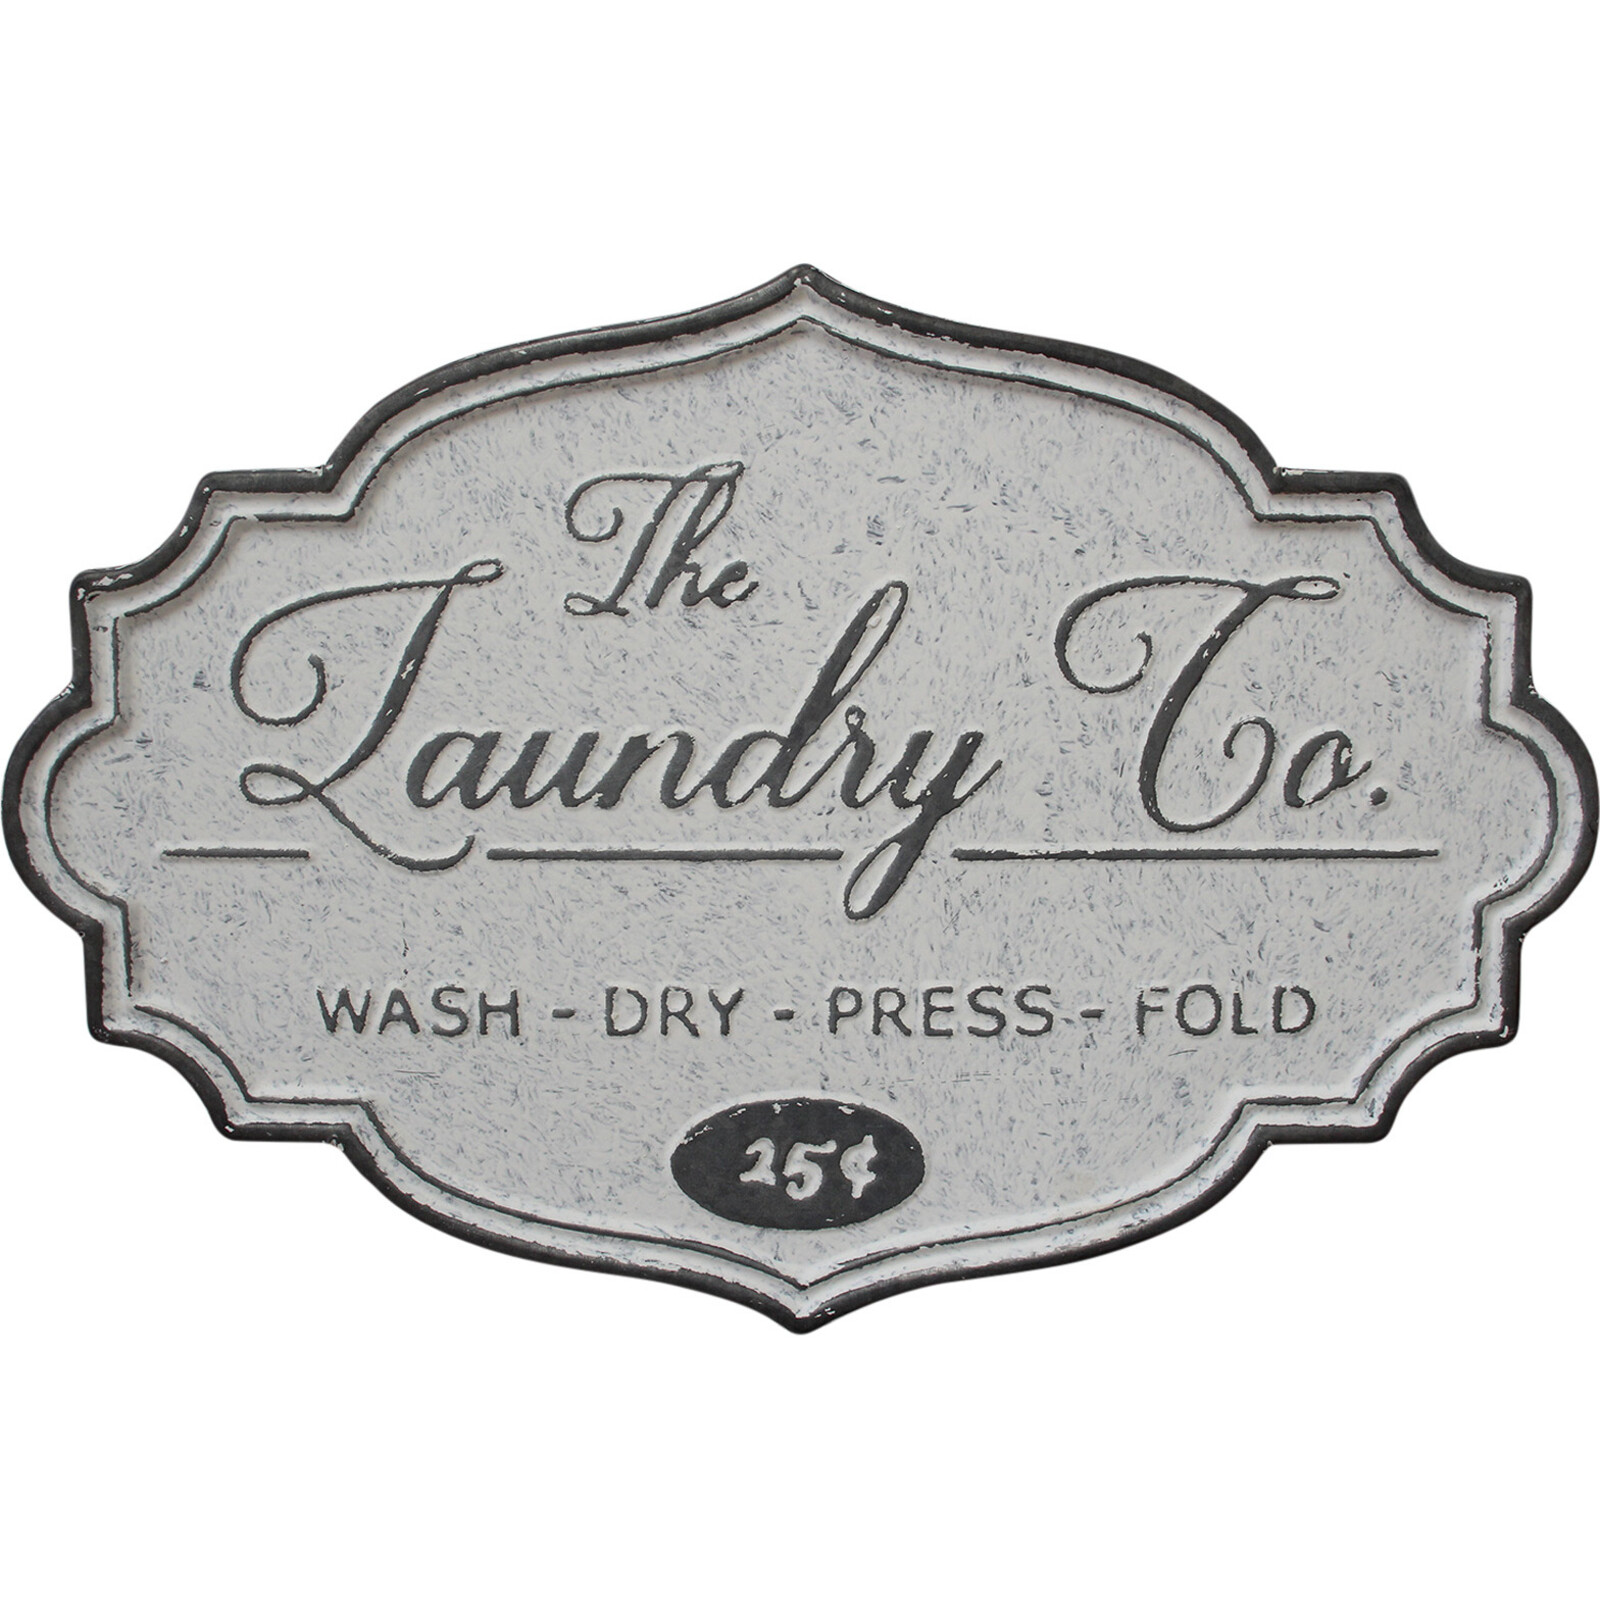 Sign Laundry Co